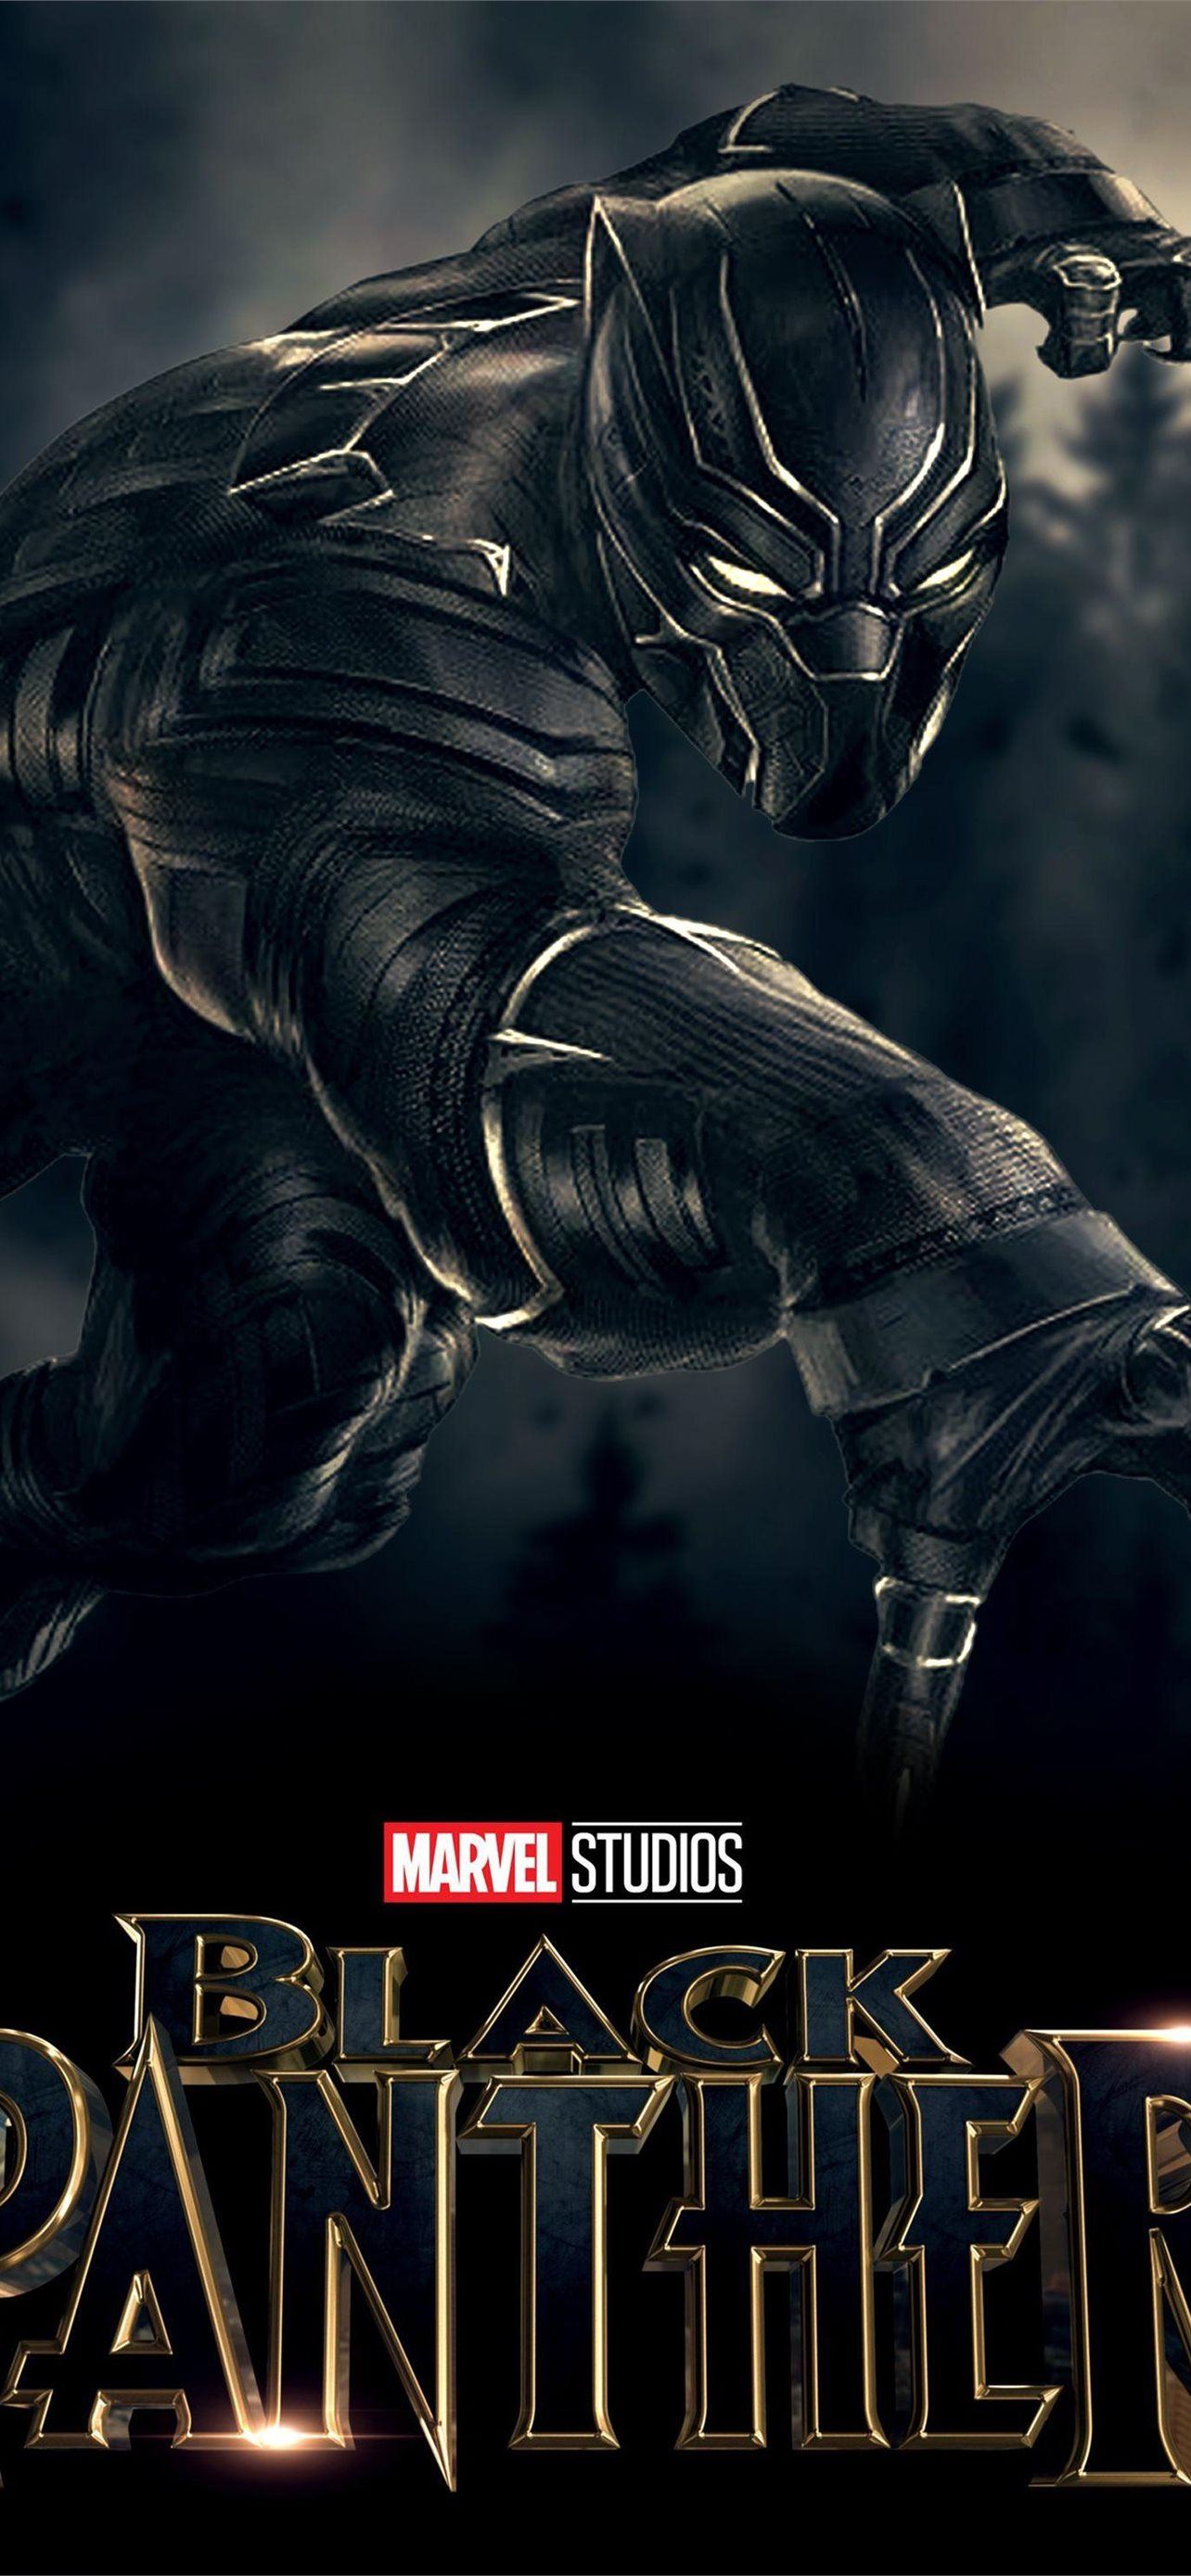 Marvel Phone Wallpaper Discover more Android Avengers Black Panther  captain america Iphone wallpape  Superhero wallpaper Marvel wallpaper  Avengers wallpaper